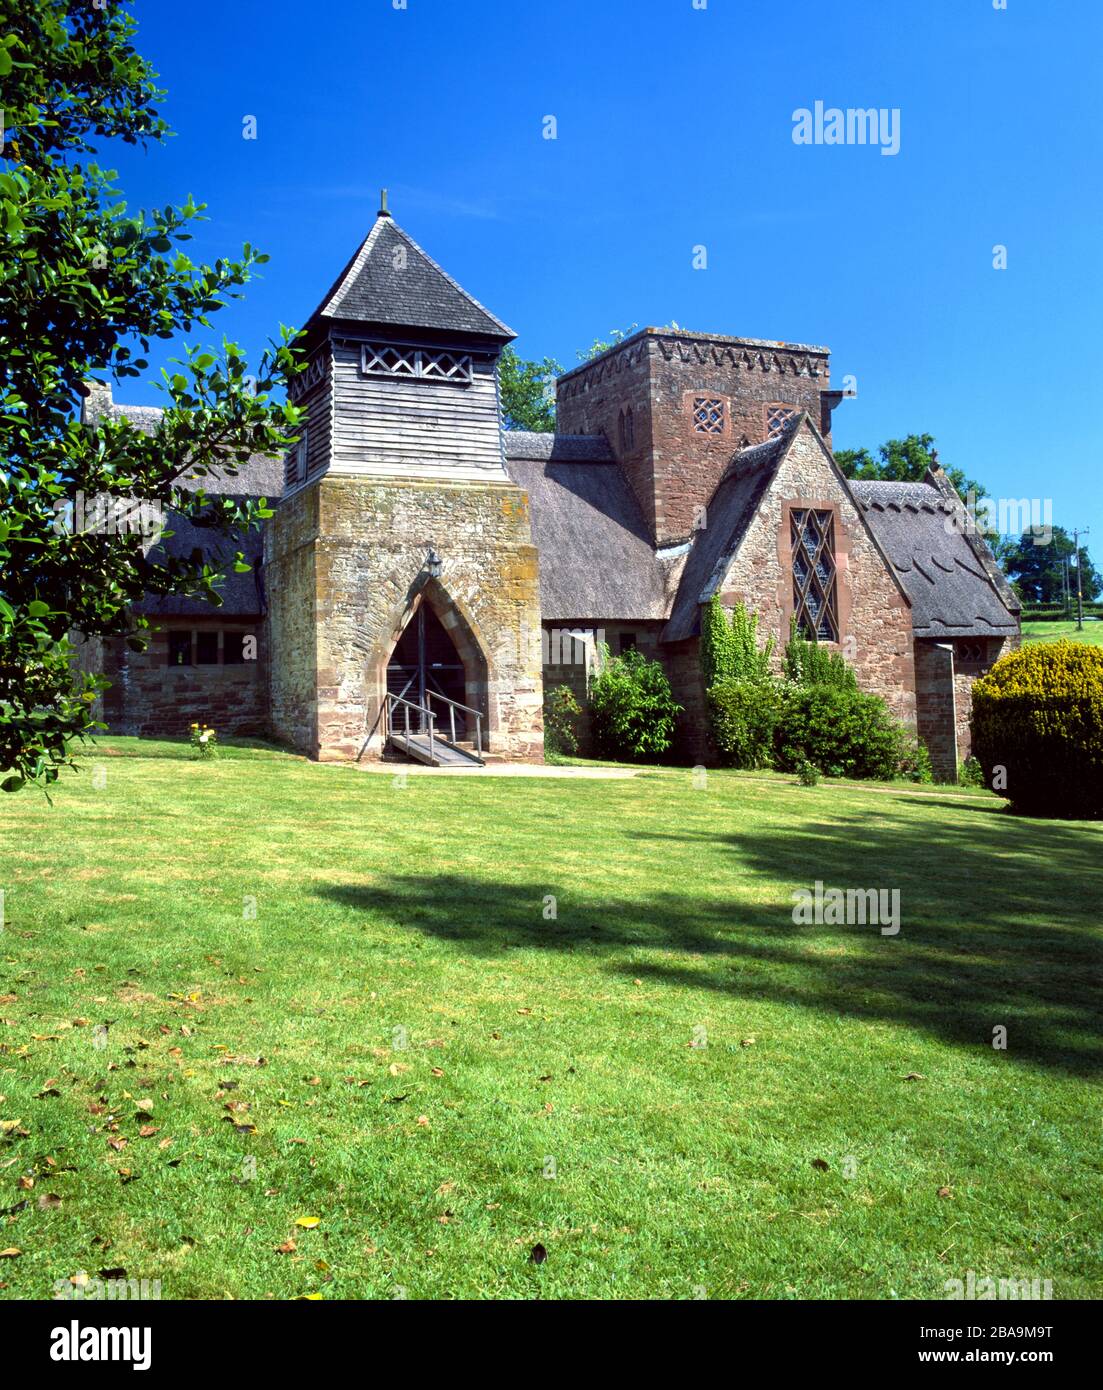 Thatched All Saints Church, Brockhampton, Herefordshire. Designed by William Lethaby in the Arts and Craft style1902. Stock Photo